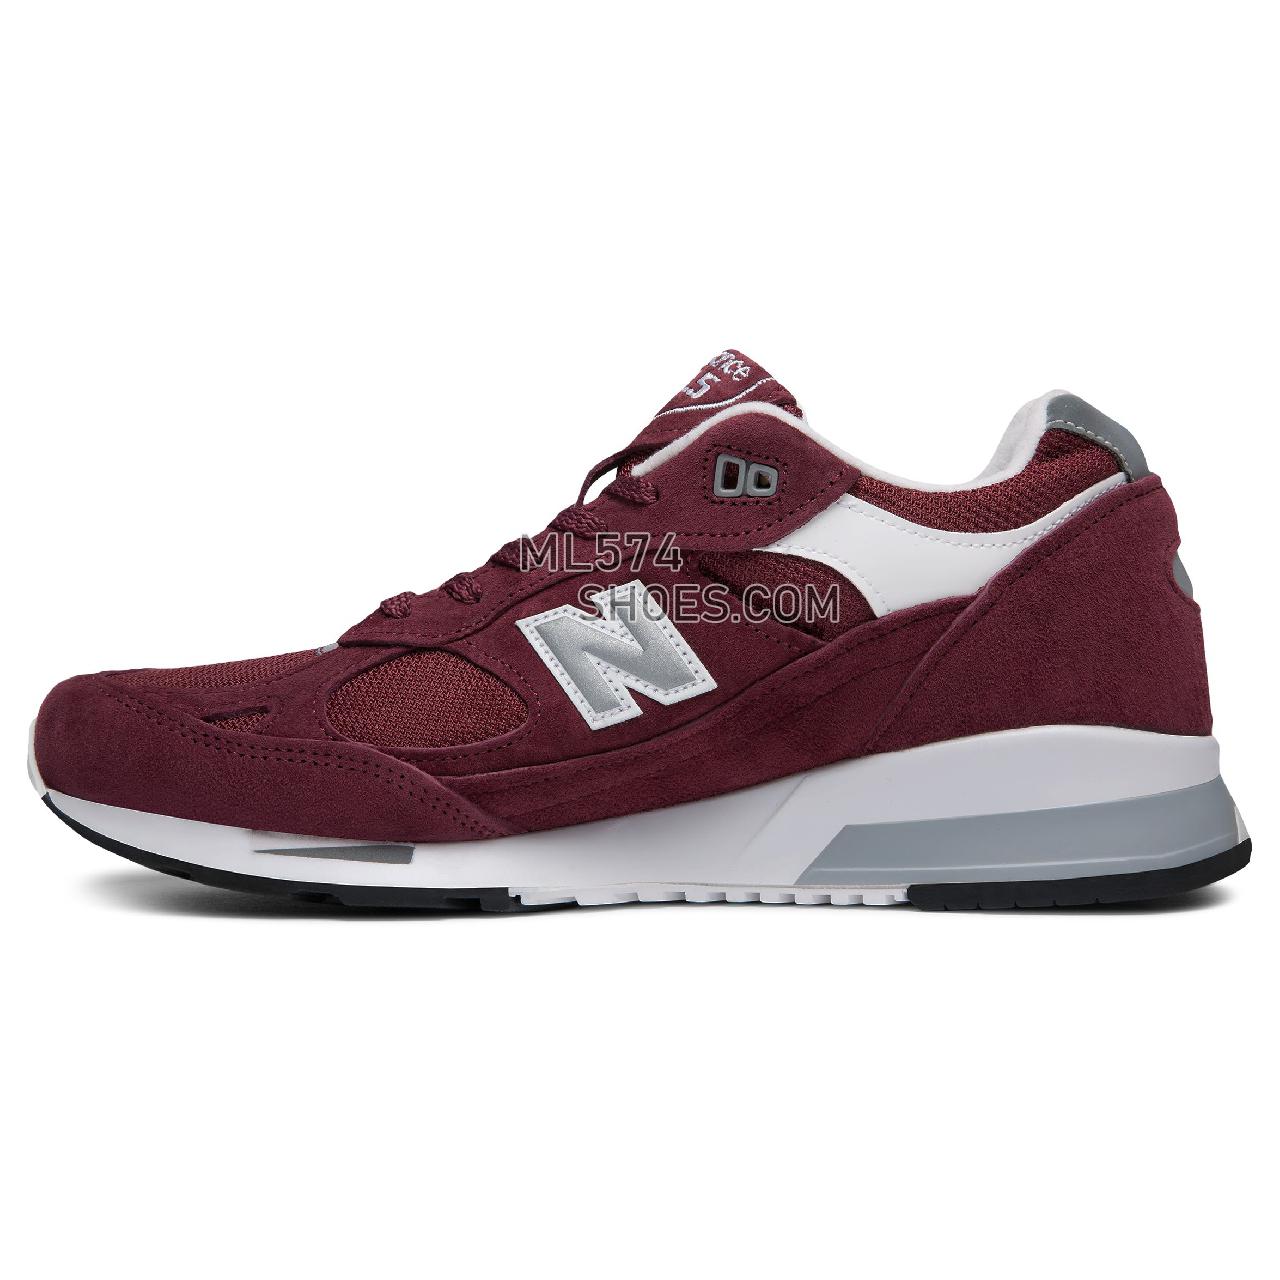 New Balance 991.5 Made in UK - Men's 991.5 Made in UK Classic M9915-PM - Port Royale with White - M9915BU